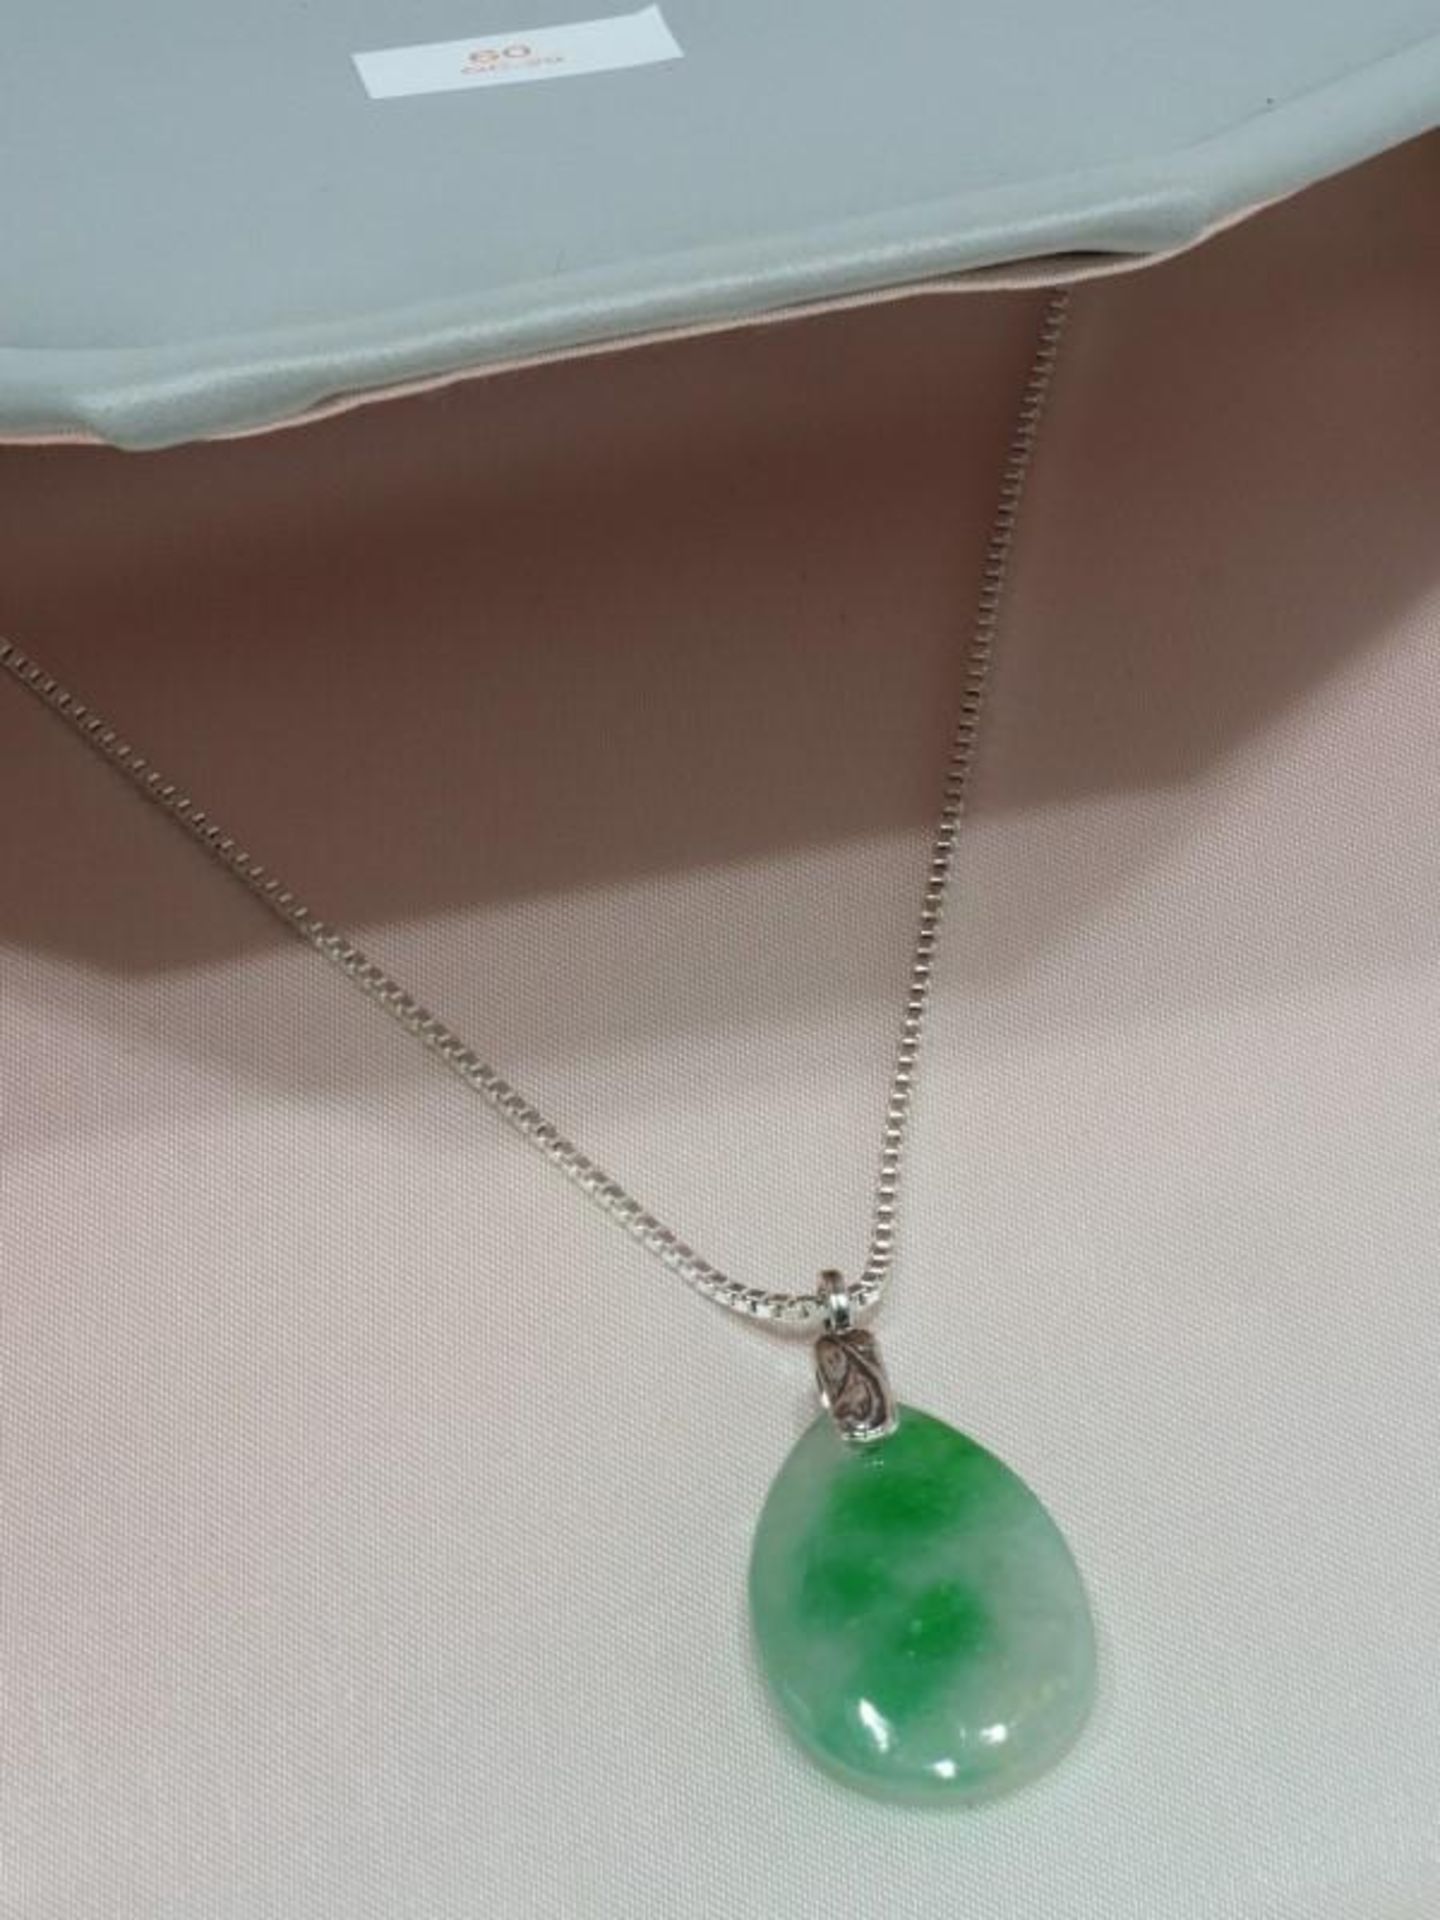 Genuine Jadeite (Approx 26.0ct) Pear Shaped Drop Necklace with Sterling Silver Chain. Retail $240 - Image 2 of 2